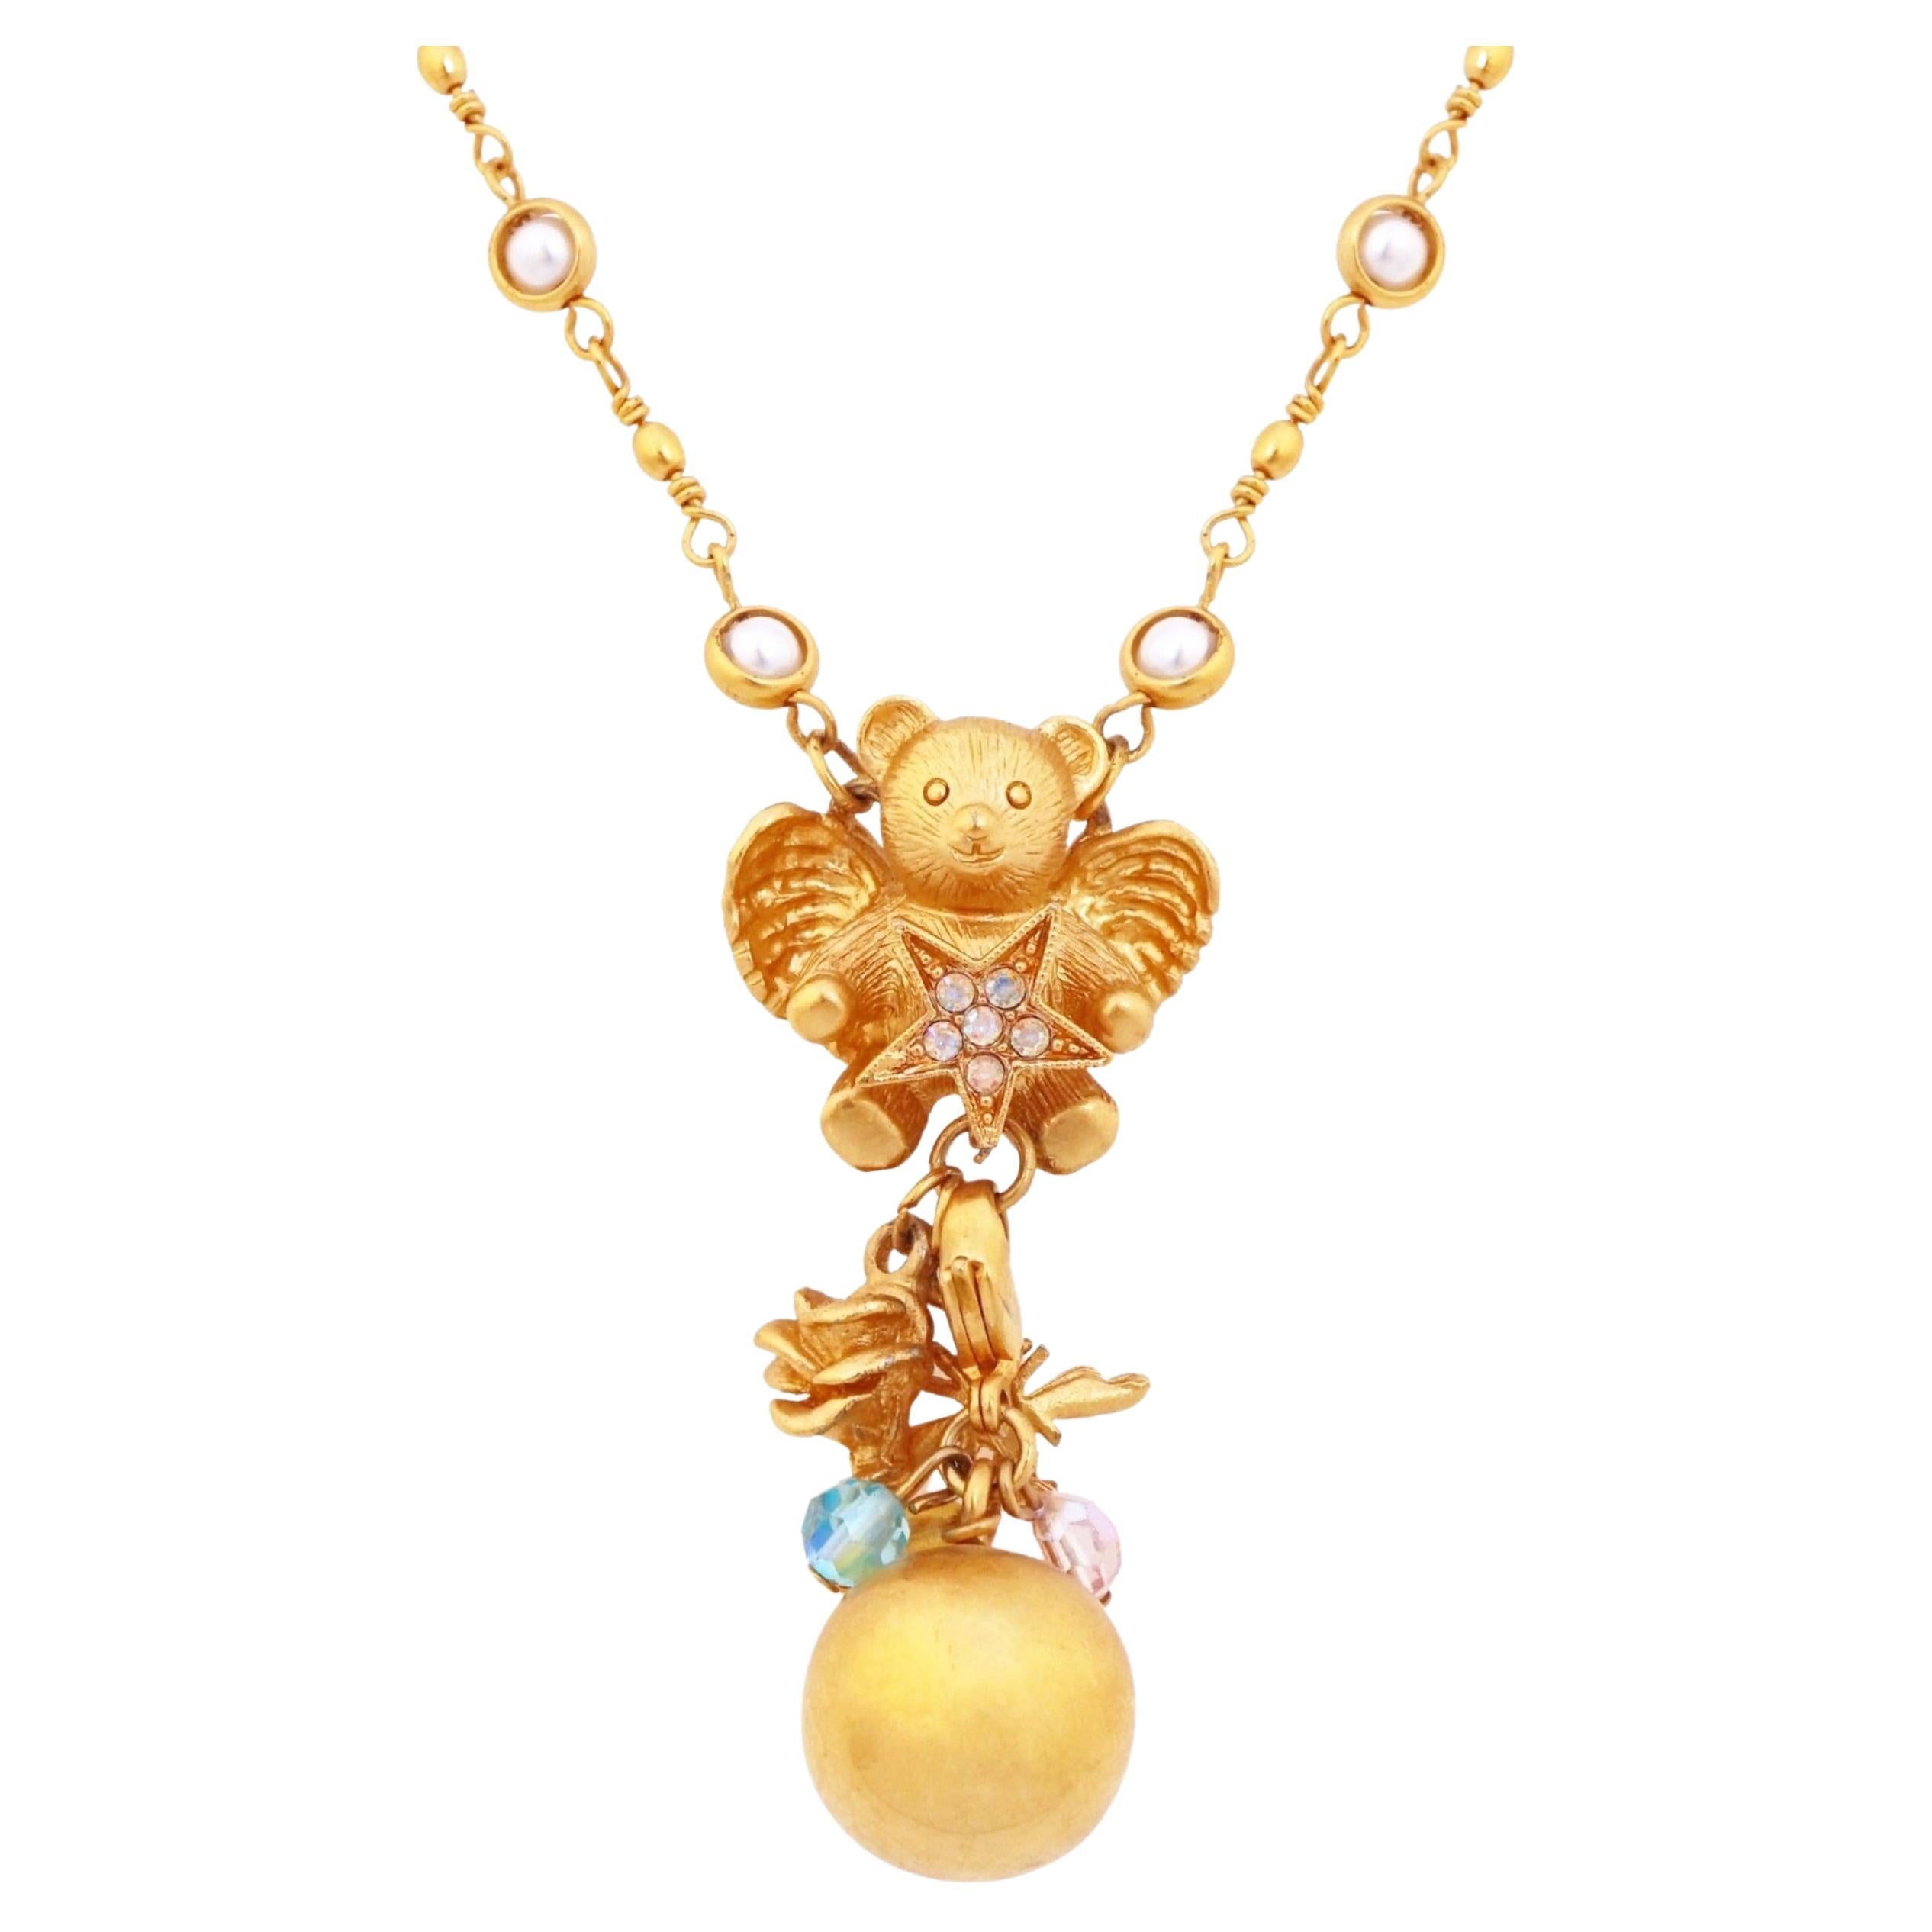 Gilded Angel Teddy Bear Pendant Necklace With Bell Dangle By Kirks Folly, 1980s For Sale